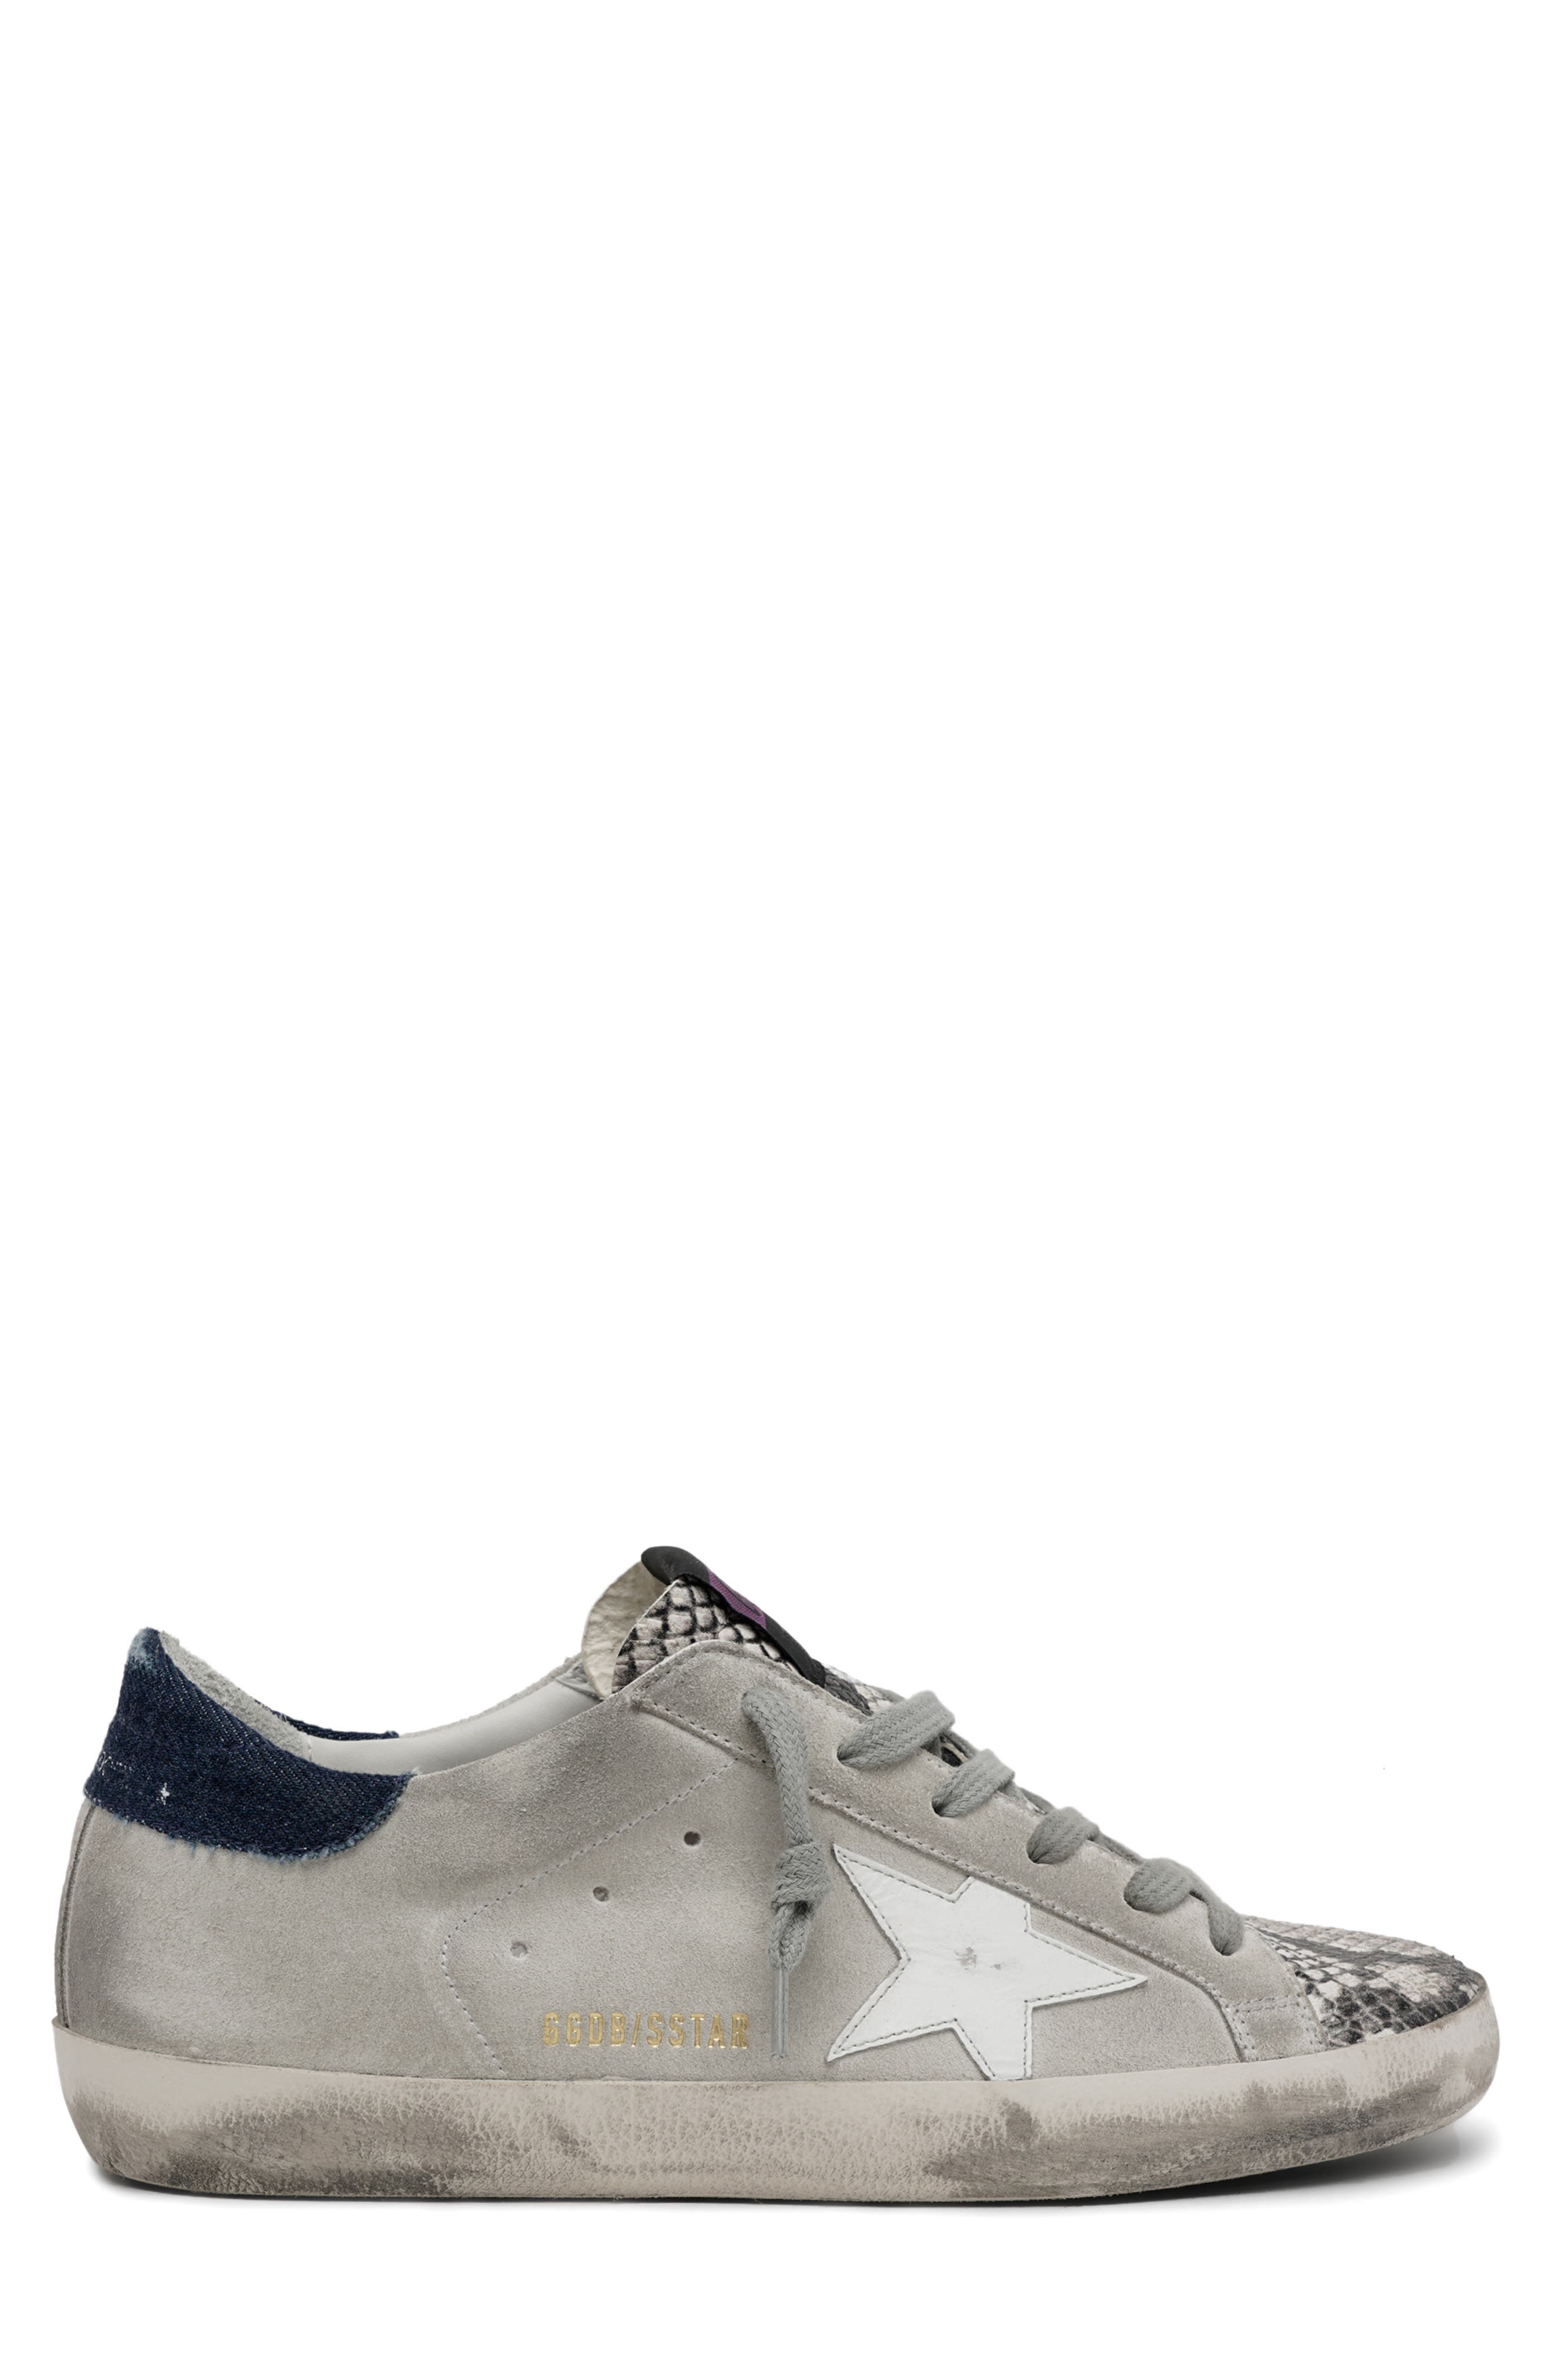 Golden Goose Super-Star Low Top Sneaker in Rock Snake/Ice/White/Blue at Nordstrom, Size 5Us